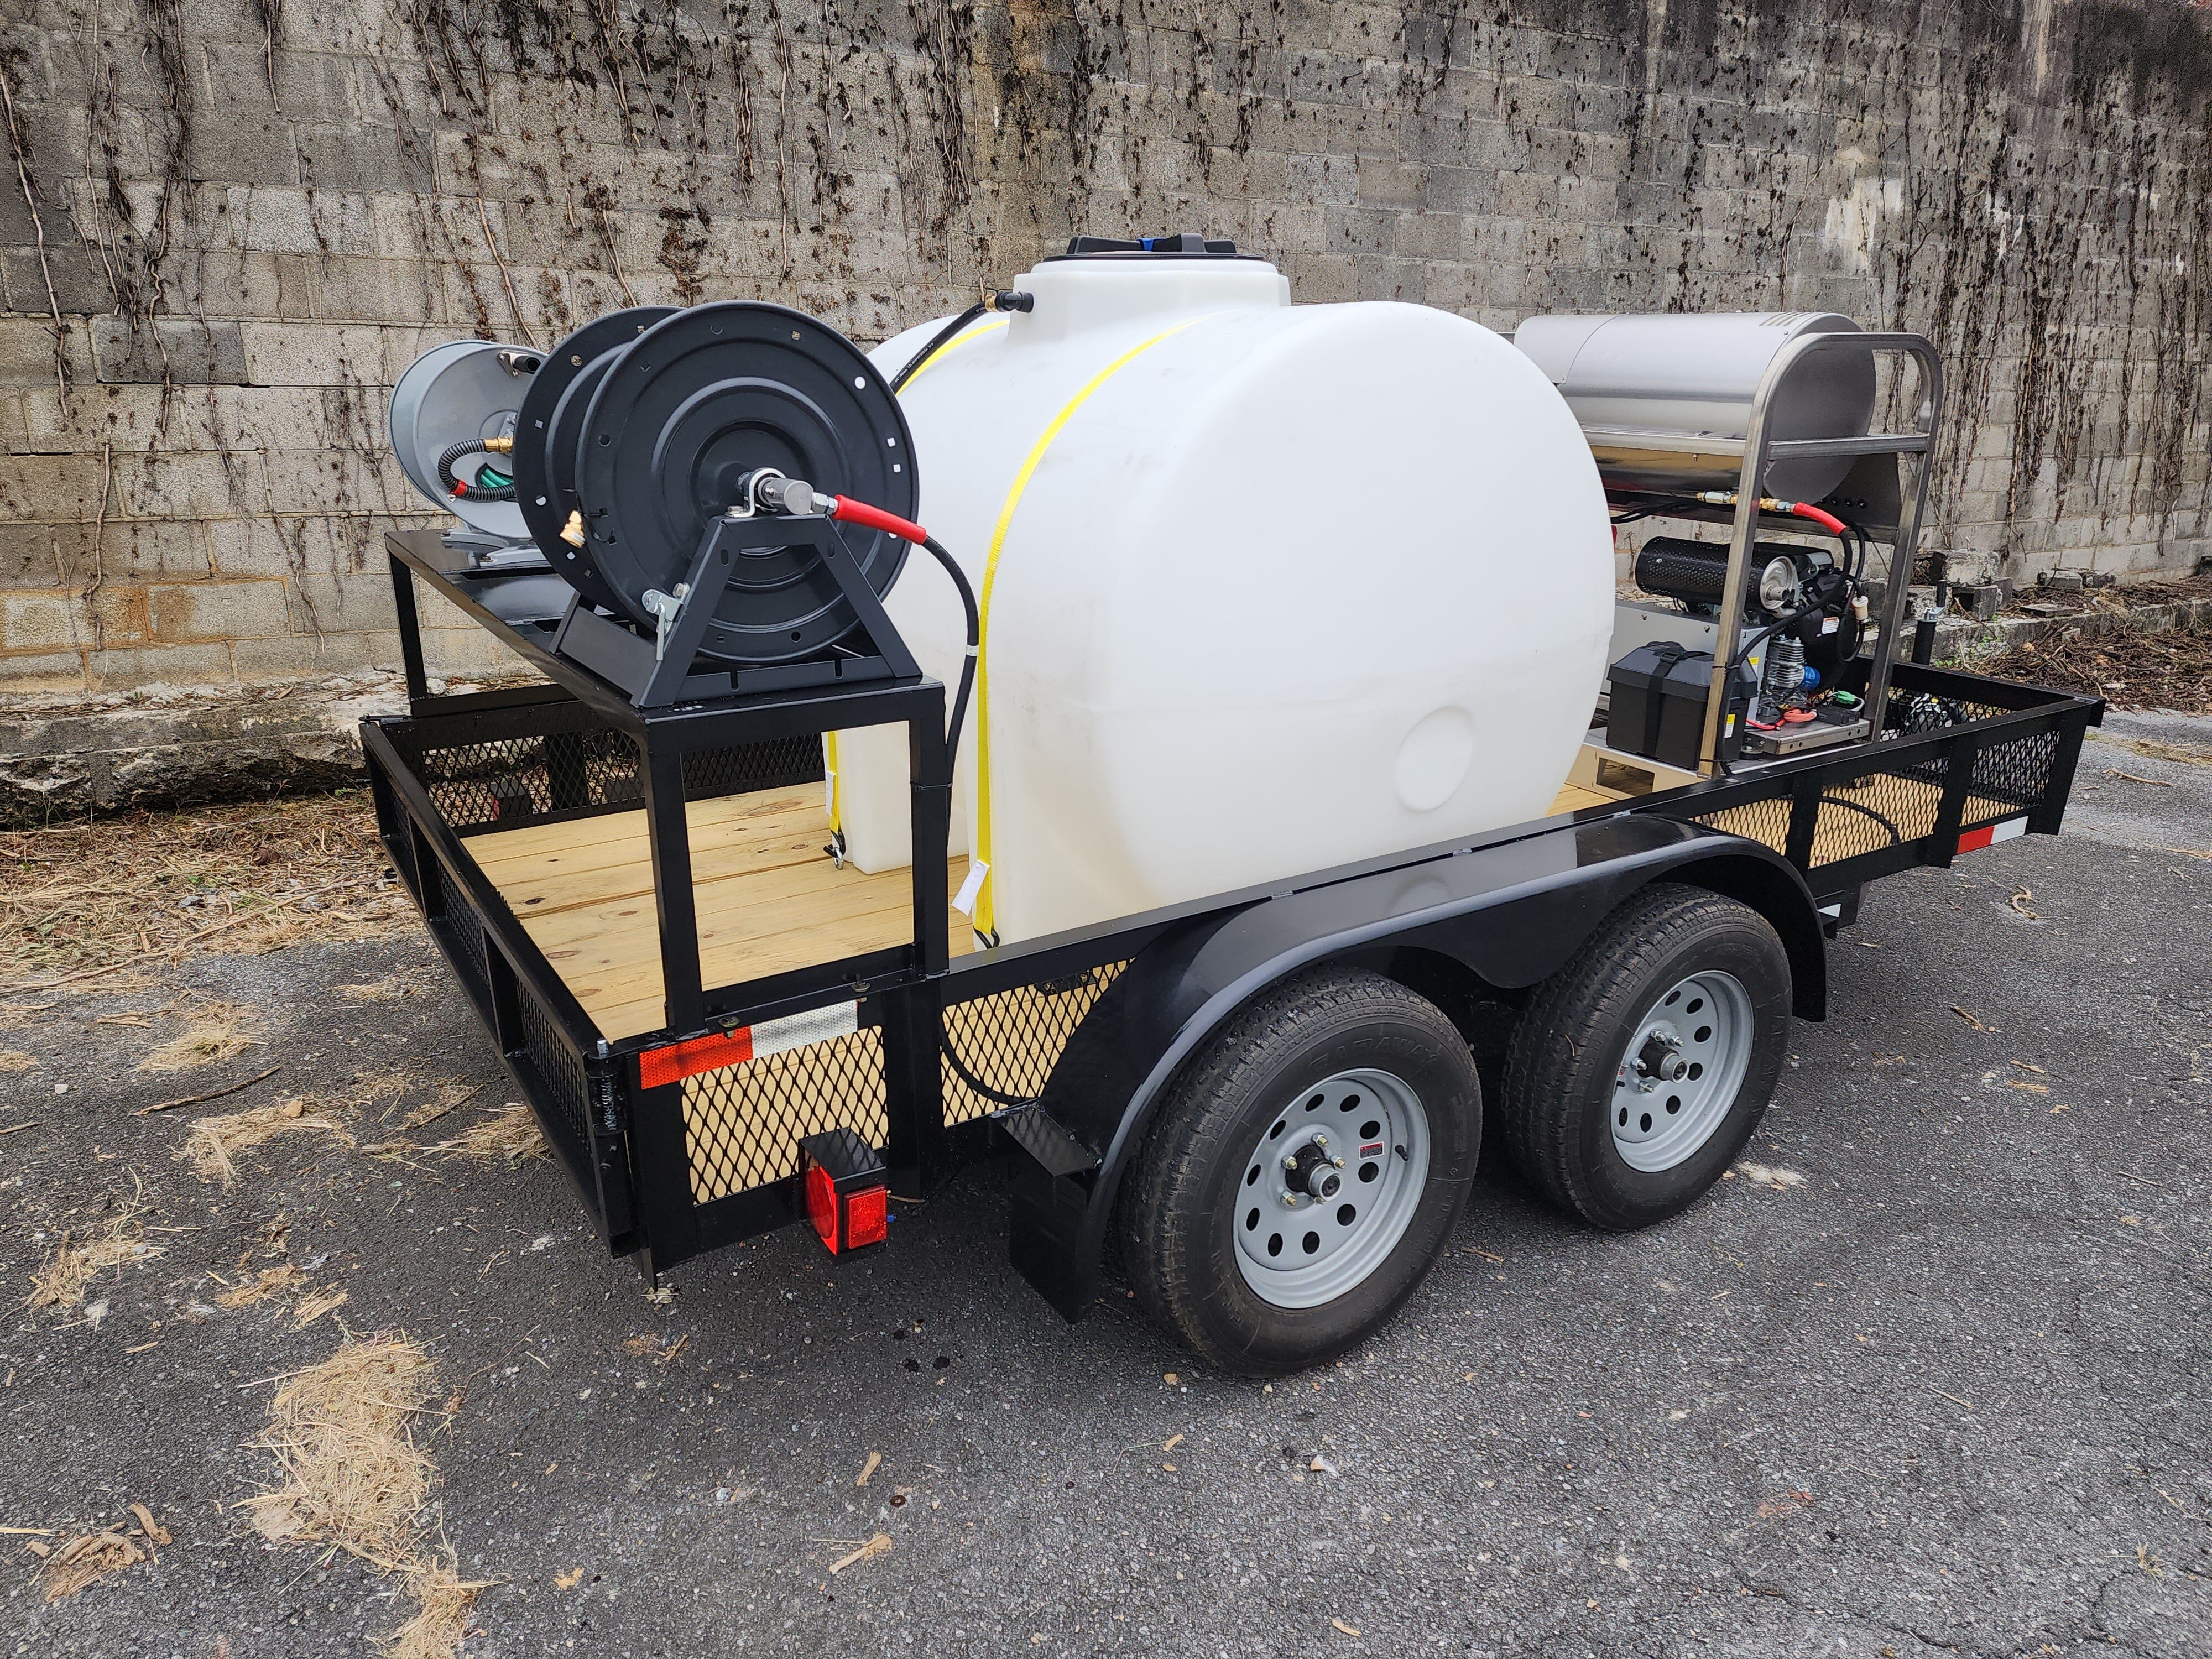 Hydro Max 8gpm at 4000psi Hot Water Trailer Package-IGX Honda-Fuel Injected Pressure Washer Trailer Package BCE Cleaning Systems 